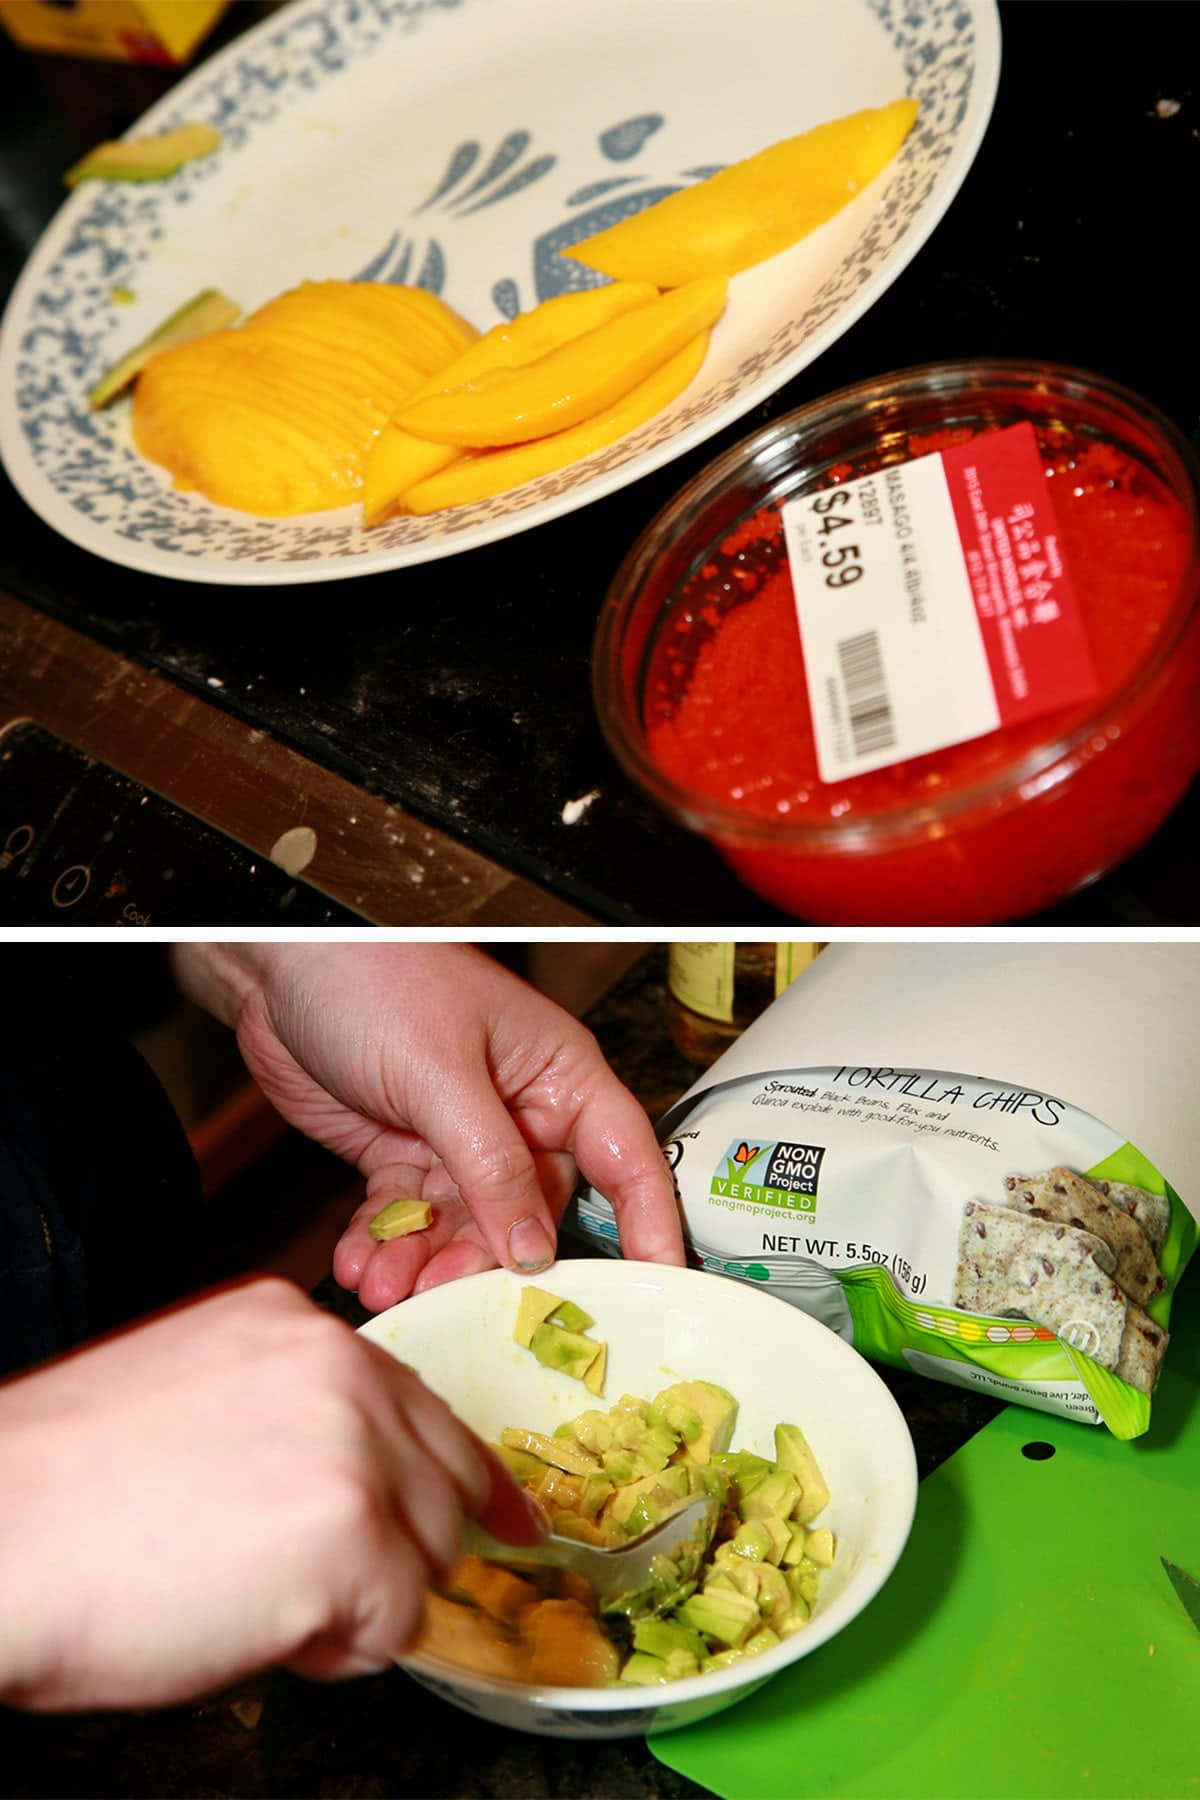 A two part image. The top one shows a plate with mango slices, and a small tub of masago roe. The bottom image shows avocado being mashed in a small bowl.